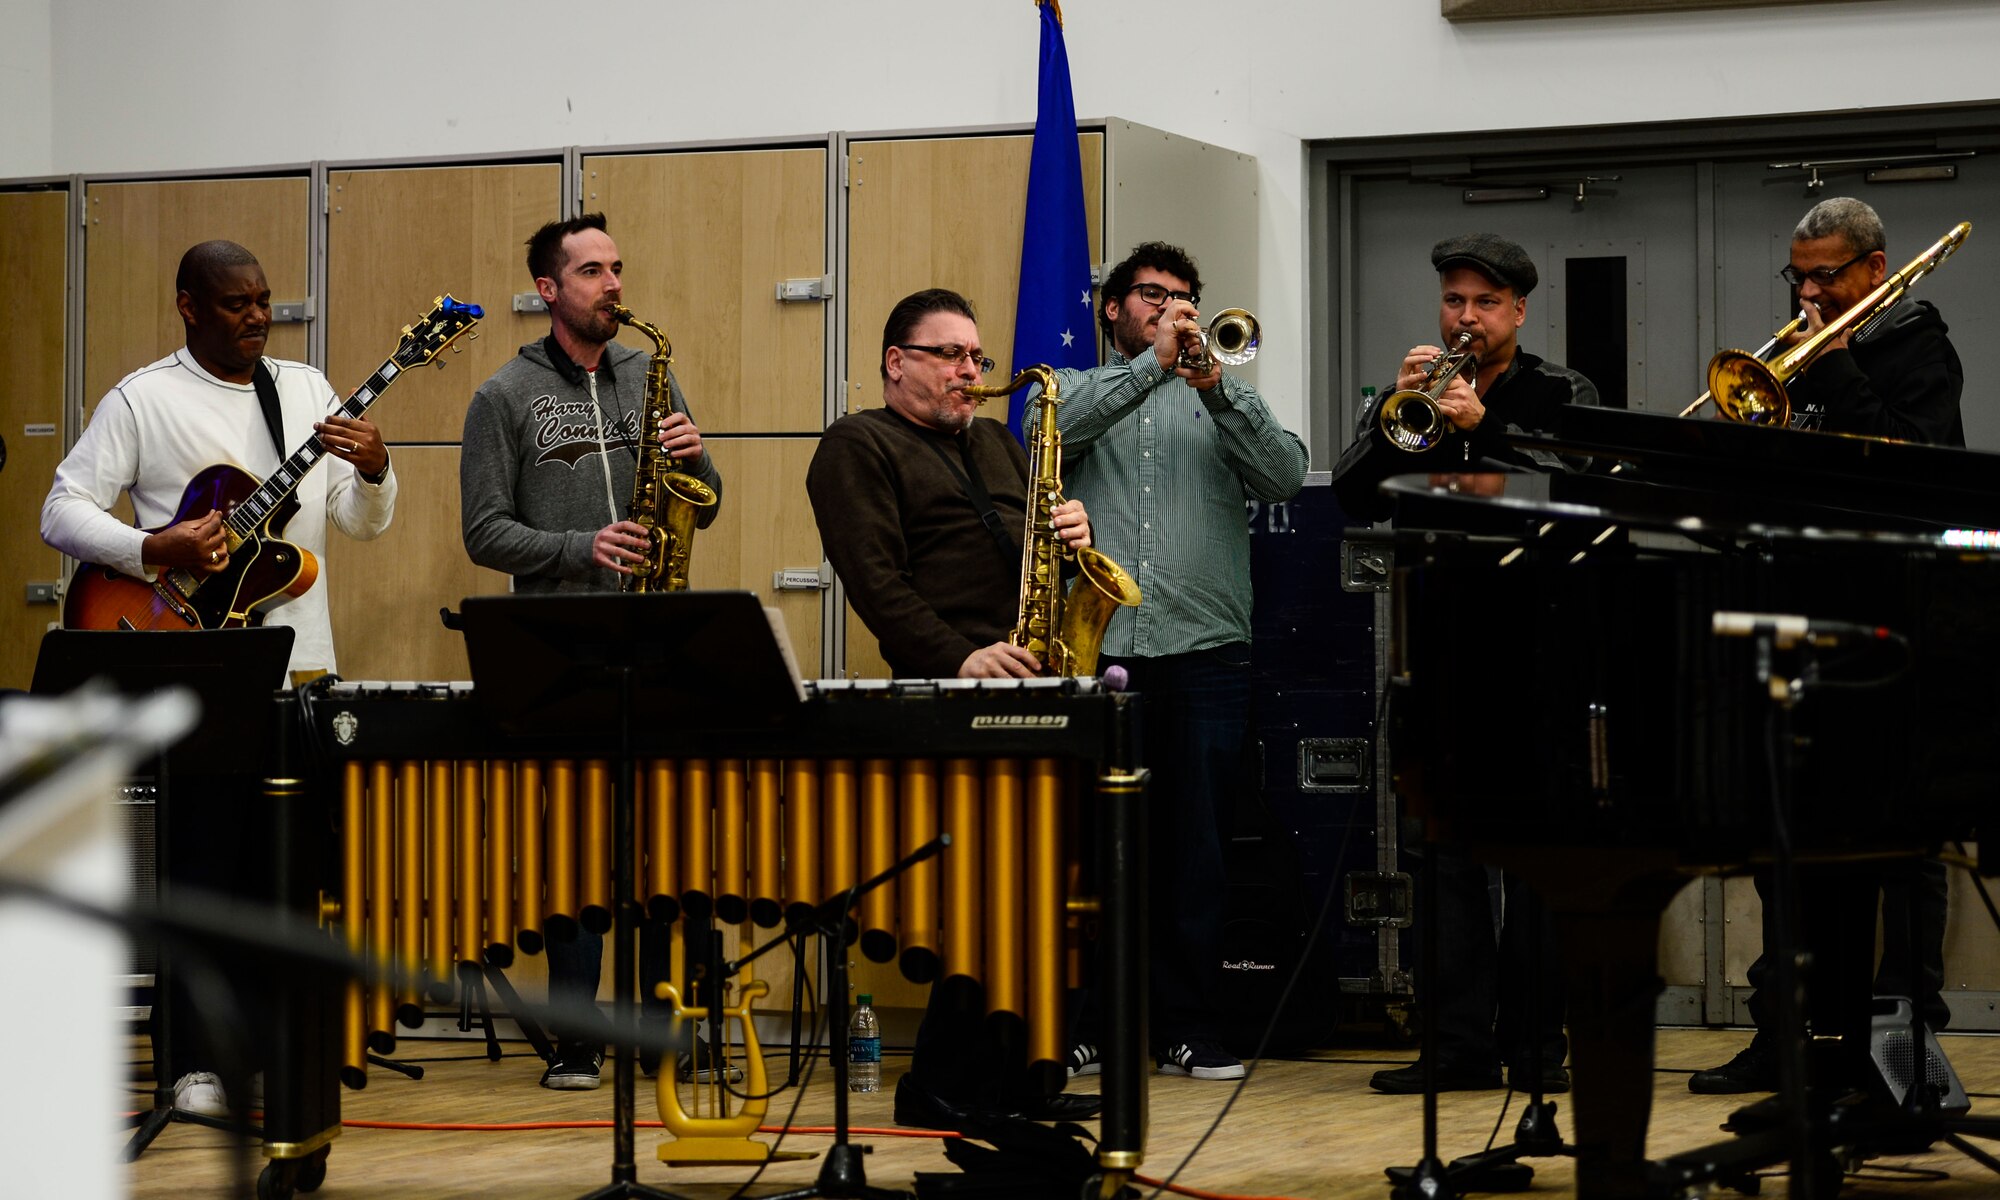 Members of the “Harry Connick Jr. Big Band” perform for U.S. Air Force, Army and Navy Service member-musicians during a visit to Langley Air Force Base, Va., Feb. 23, 2015. The U.S. Air Force Heritage of America Band “Rhythm in Blue” ensemble hosted Connick Jr. and his band as part of a good-will tour of the base. (U.S. Air Force photo by Senior Airman Kayla Newman/Released)